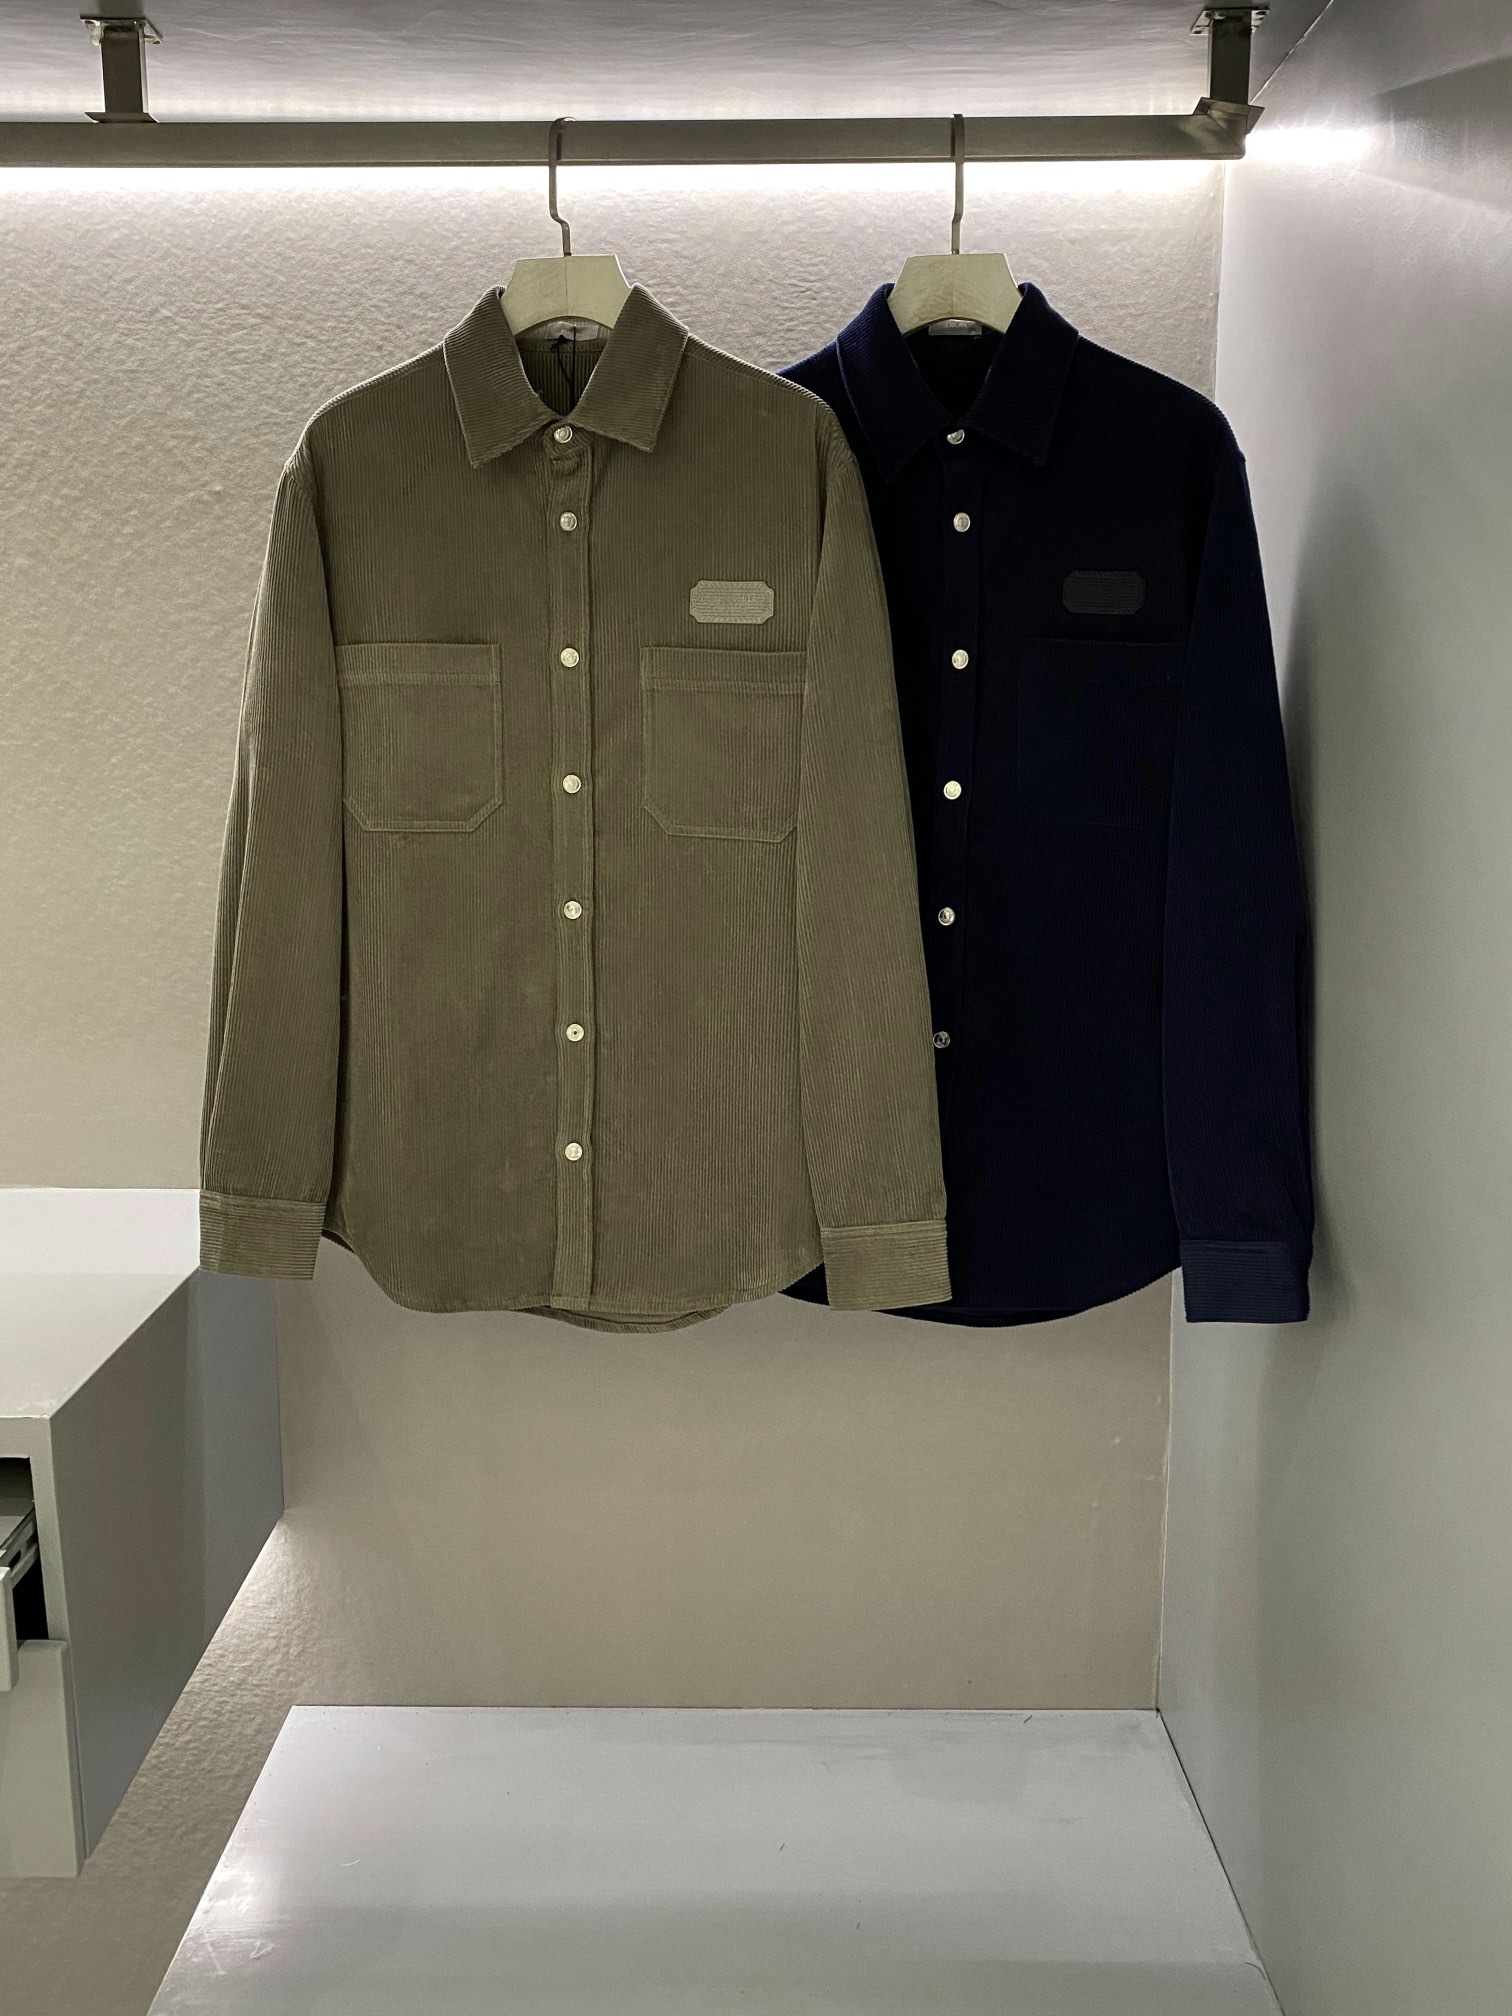 Dior Clothing Shirts & Blouses Blue Dark Khaki Embroidery Unisex Cotton Spring/Summer Collection Vintage Long Sleeve